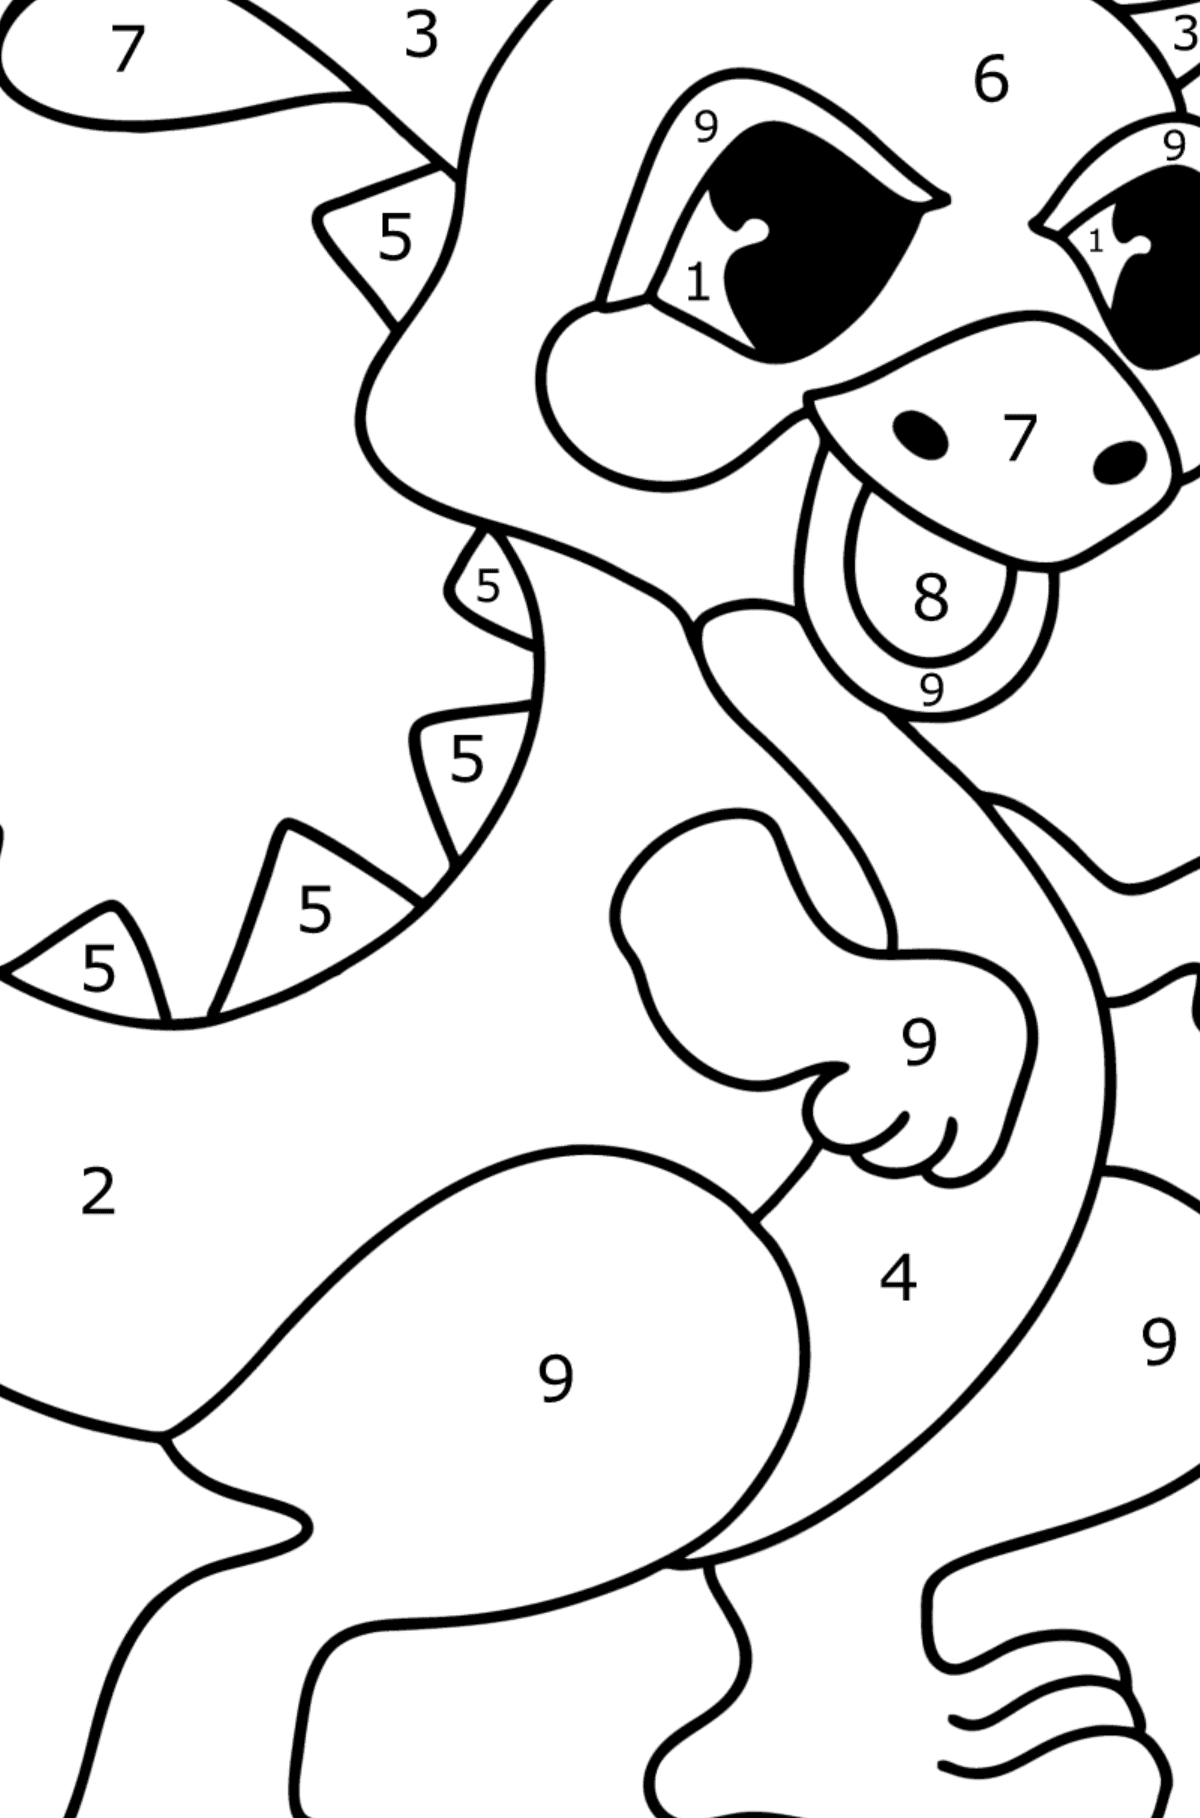 Cartoon dragon coloring page - Coloring by Numbers for Kids